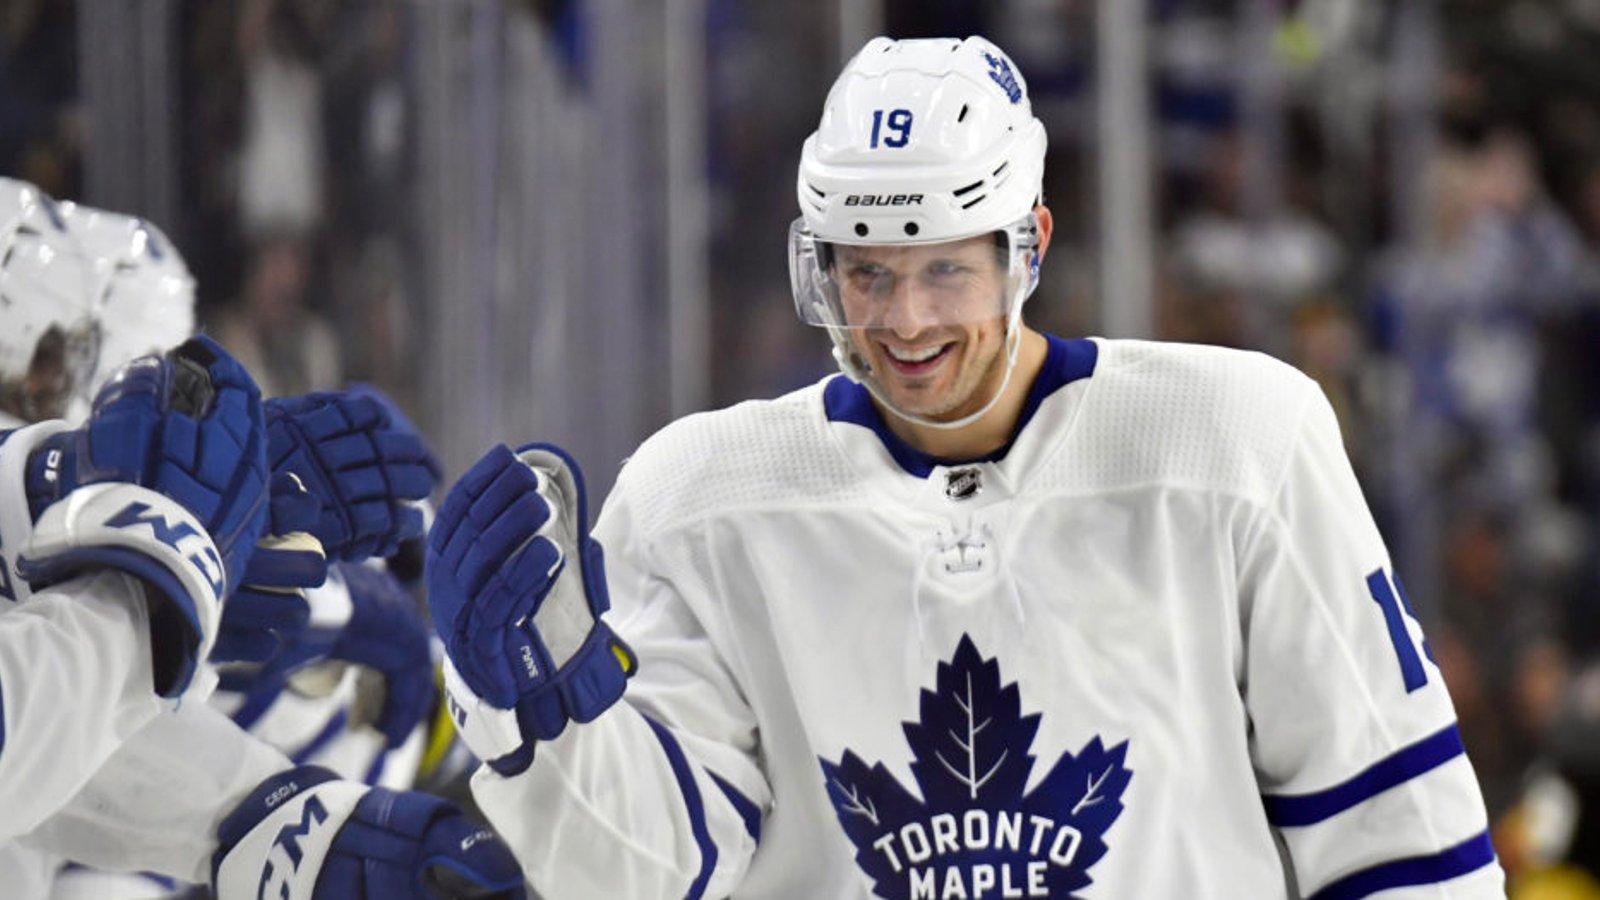 Spezza spearheads campaign to have Leafs teammates pay AHL players